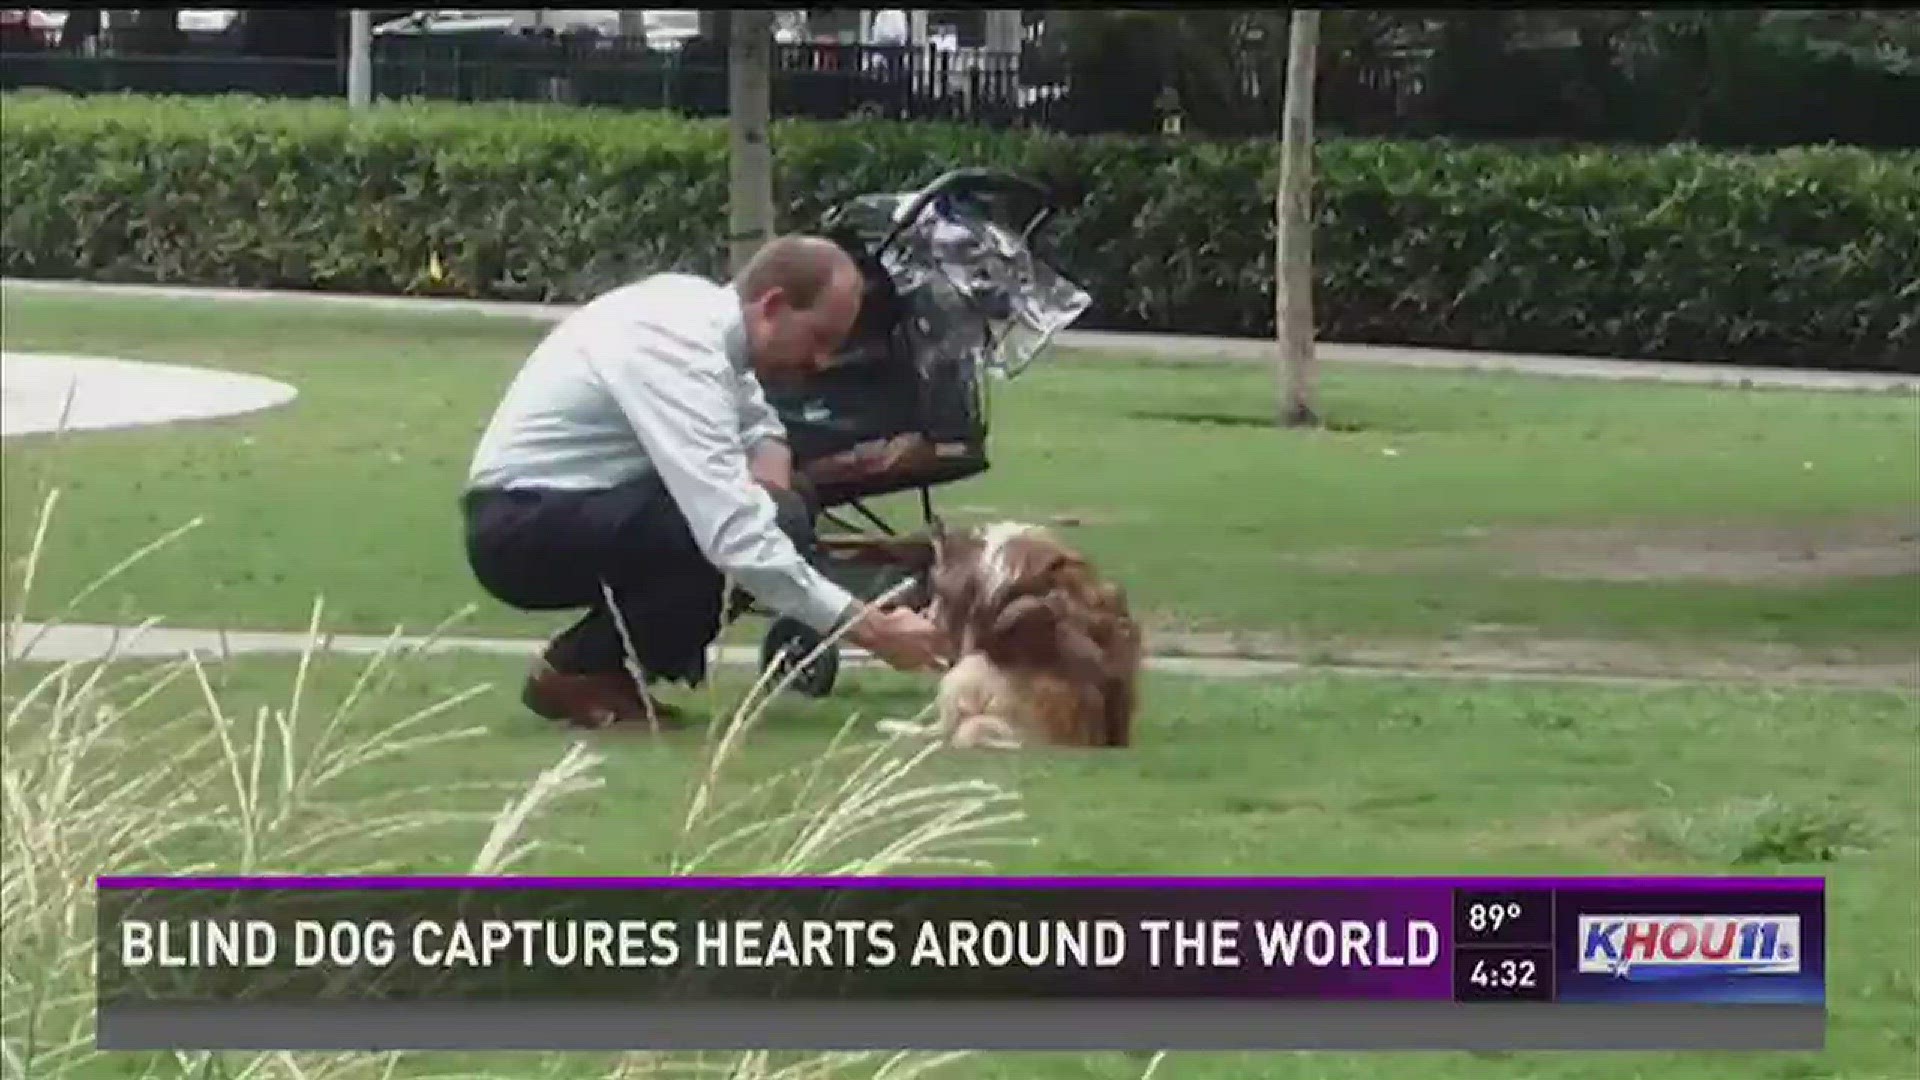 Max, the 16-year-old blind dog whose owners take him on a daily walk to Discovery Green, has captured the hearts of people around the world.